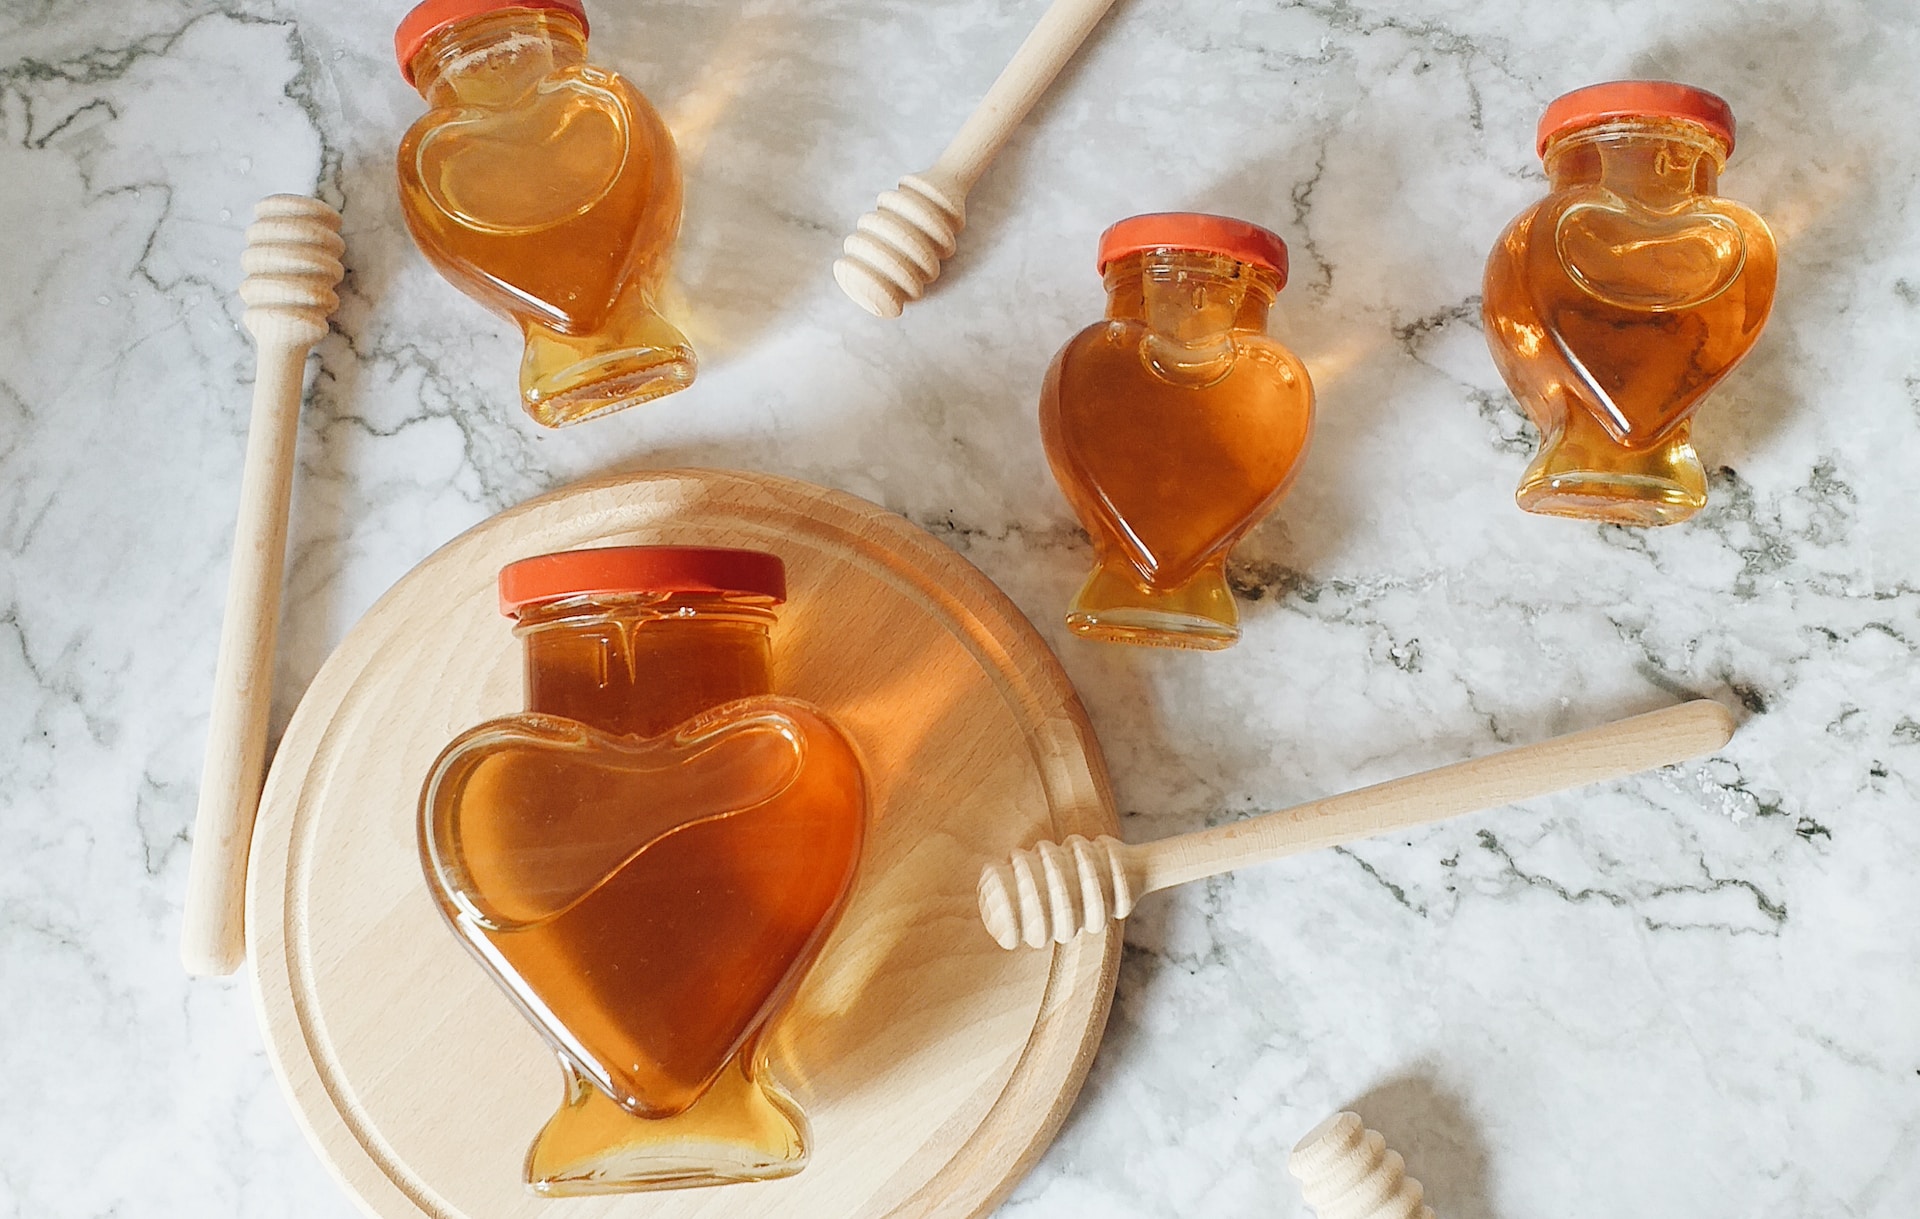 Treat your skin with a honey and cinnamon mask that leaves it glowing and nourished.